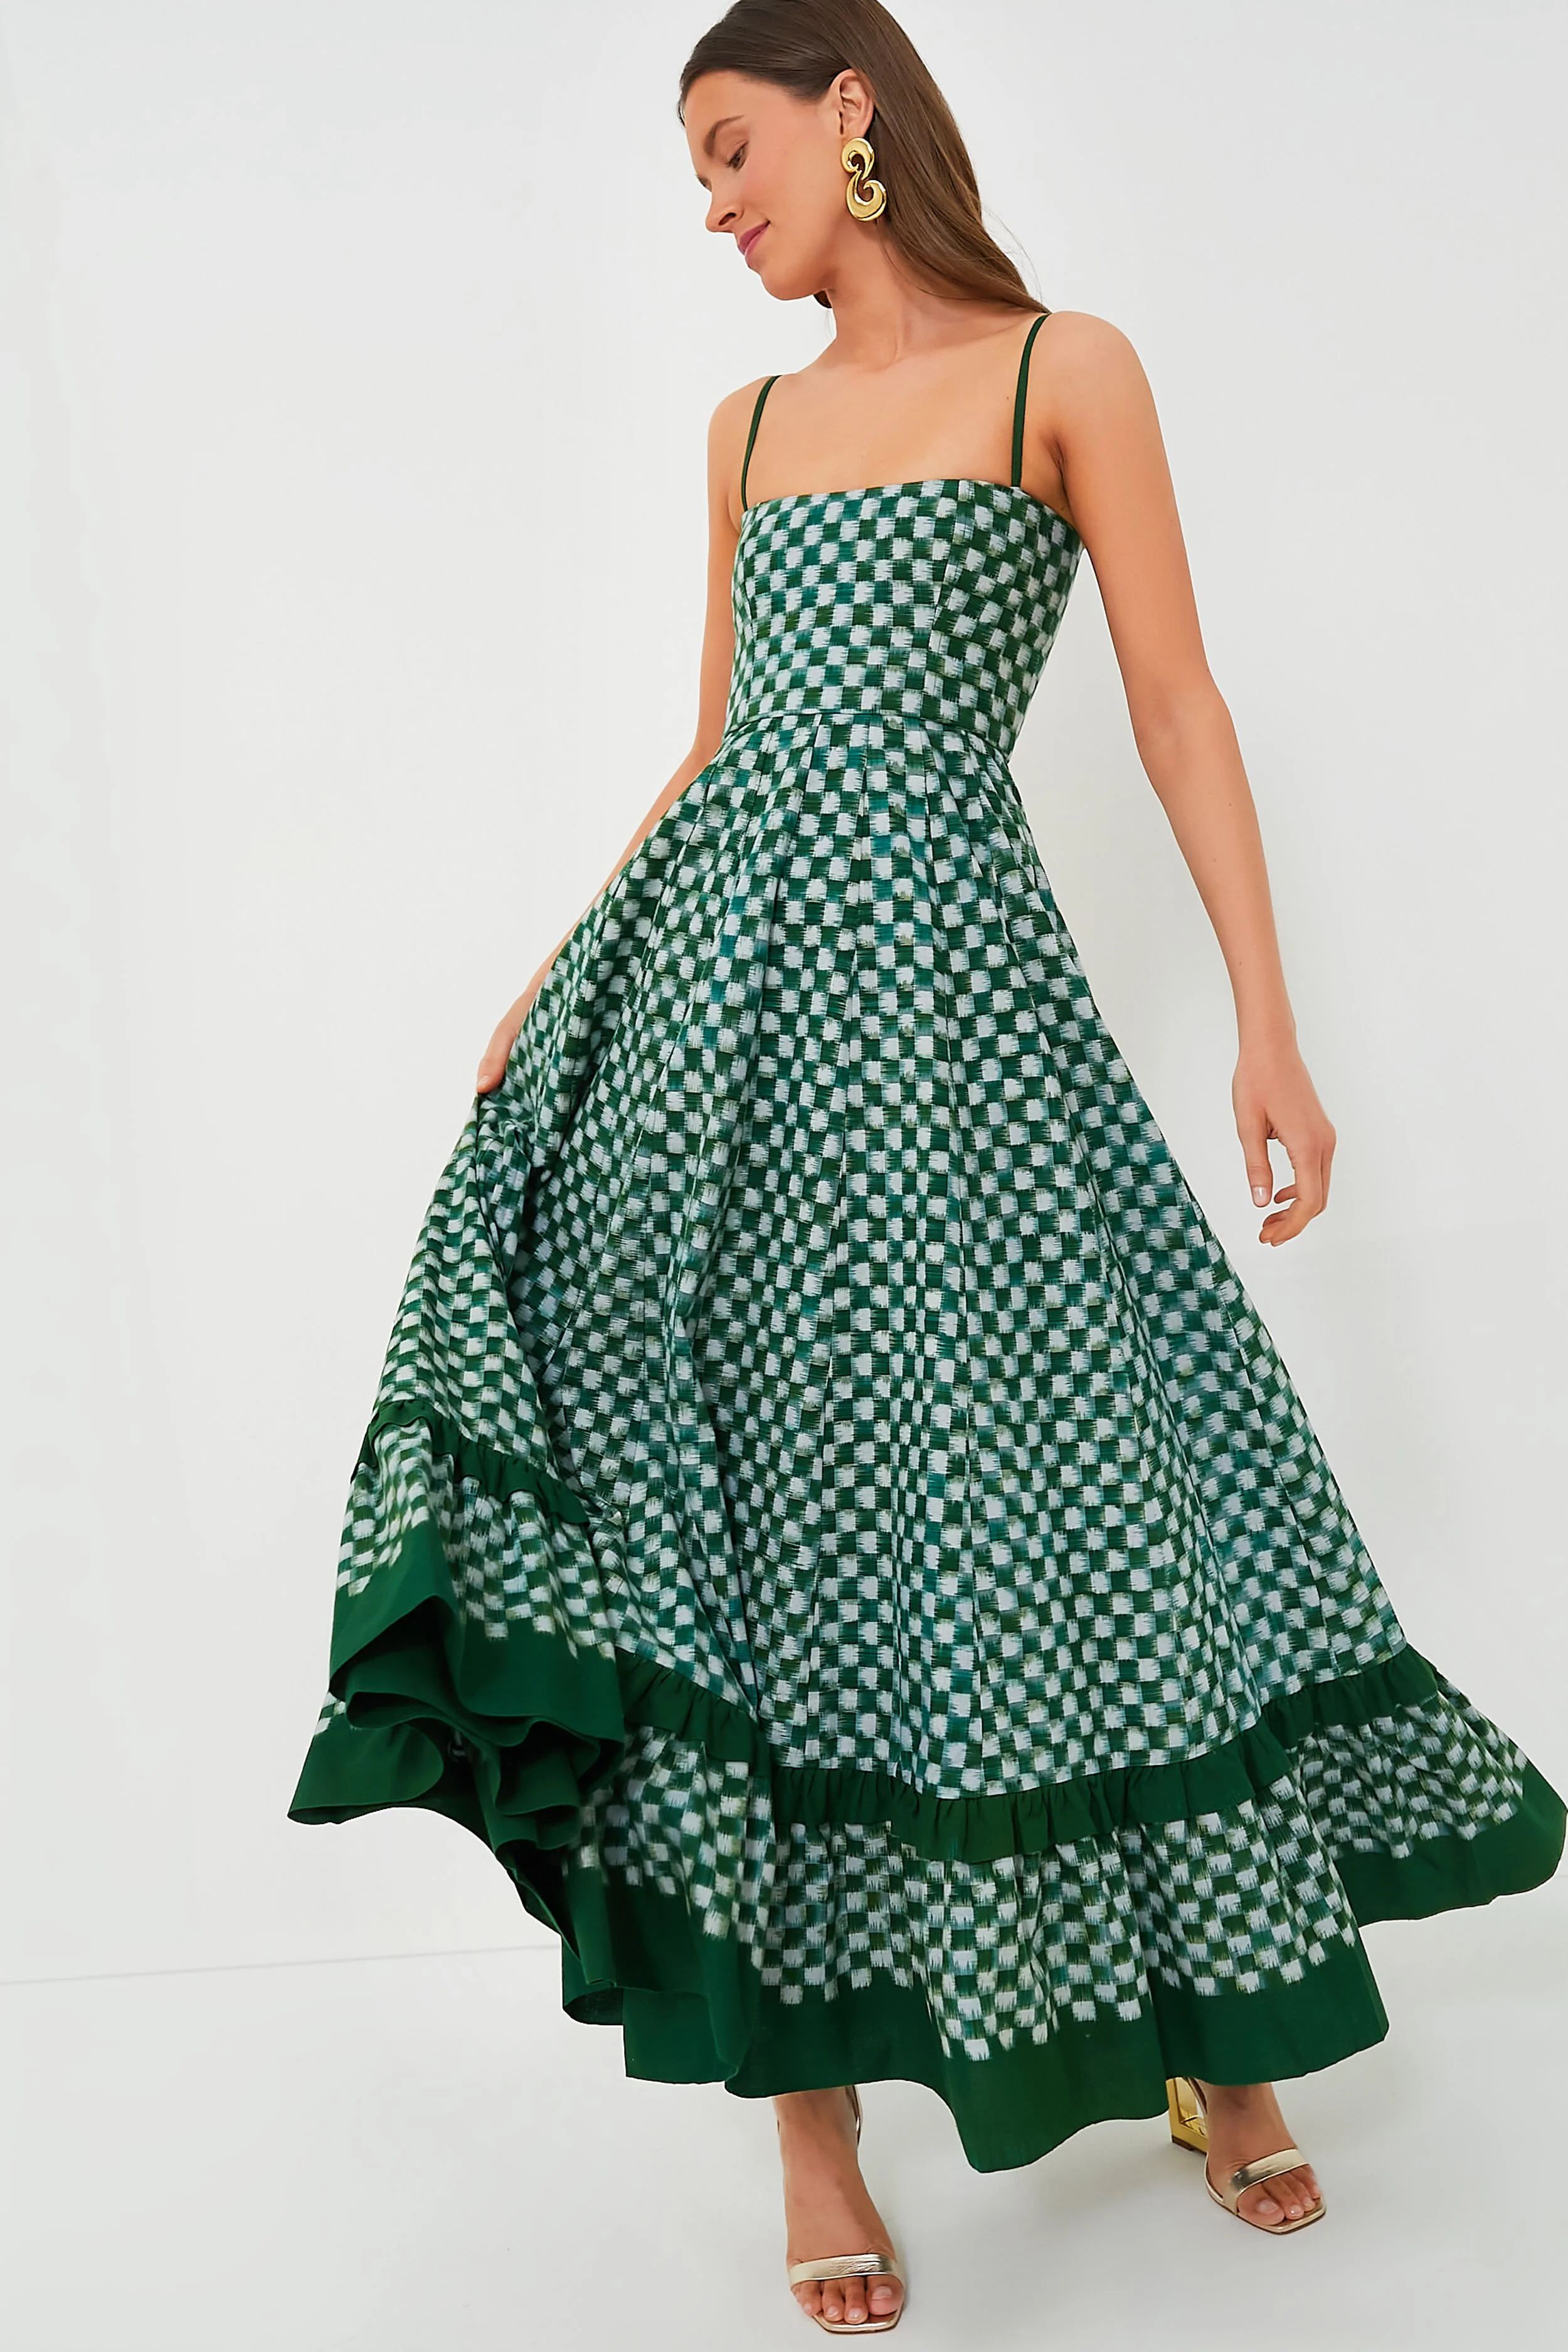 Green Checkmate Dress | Tuckernuck | Spring Fashion | Country Club Outfits  | Tuckernuck (US)